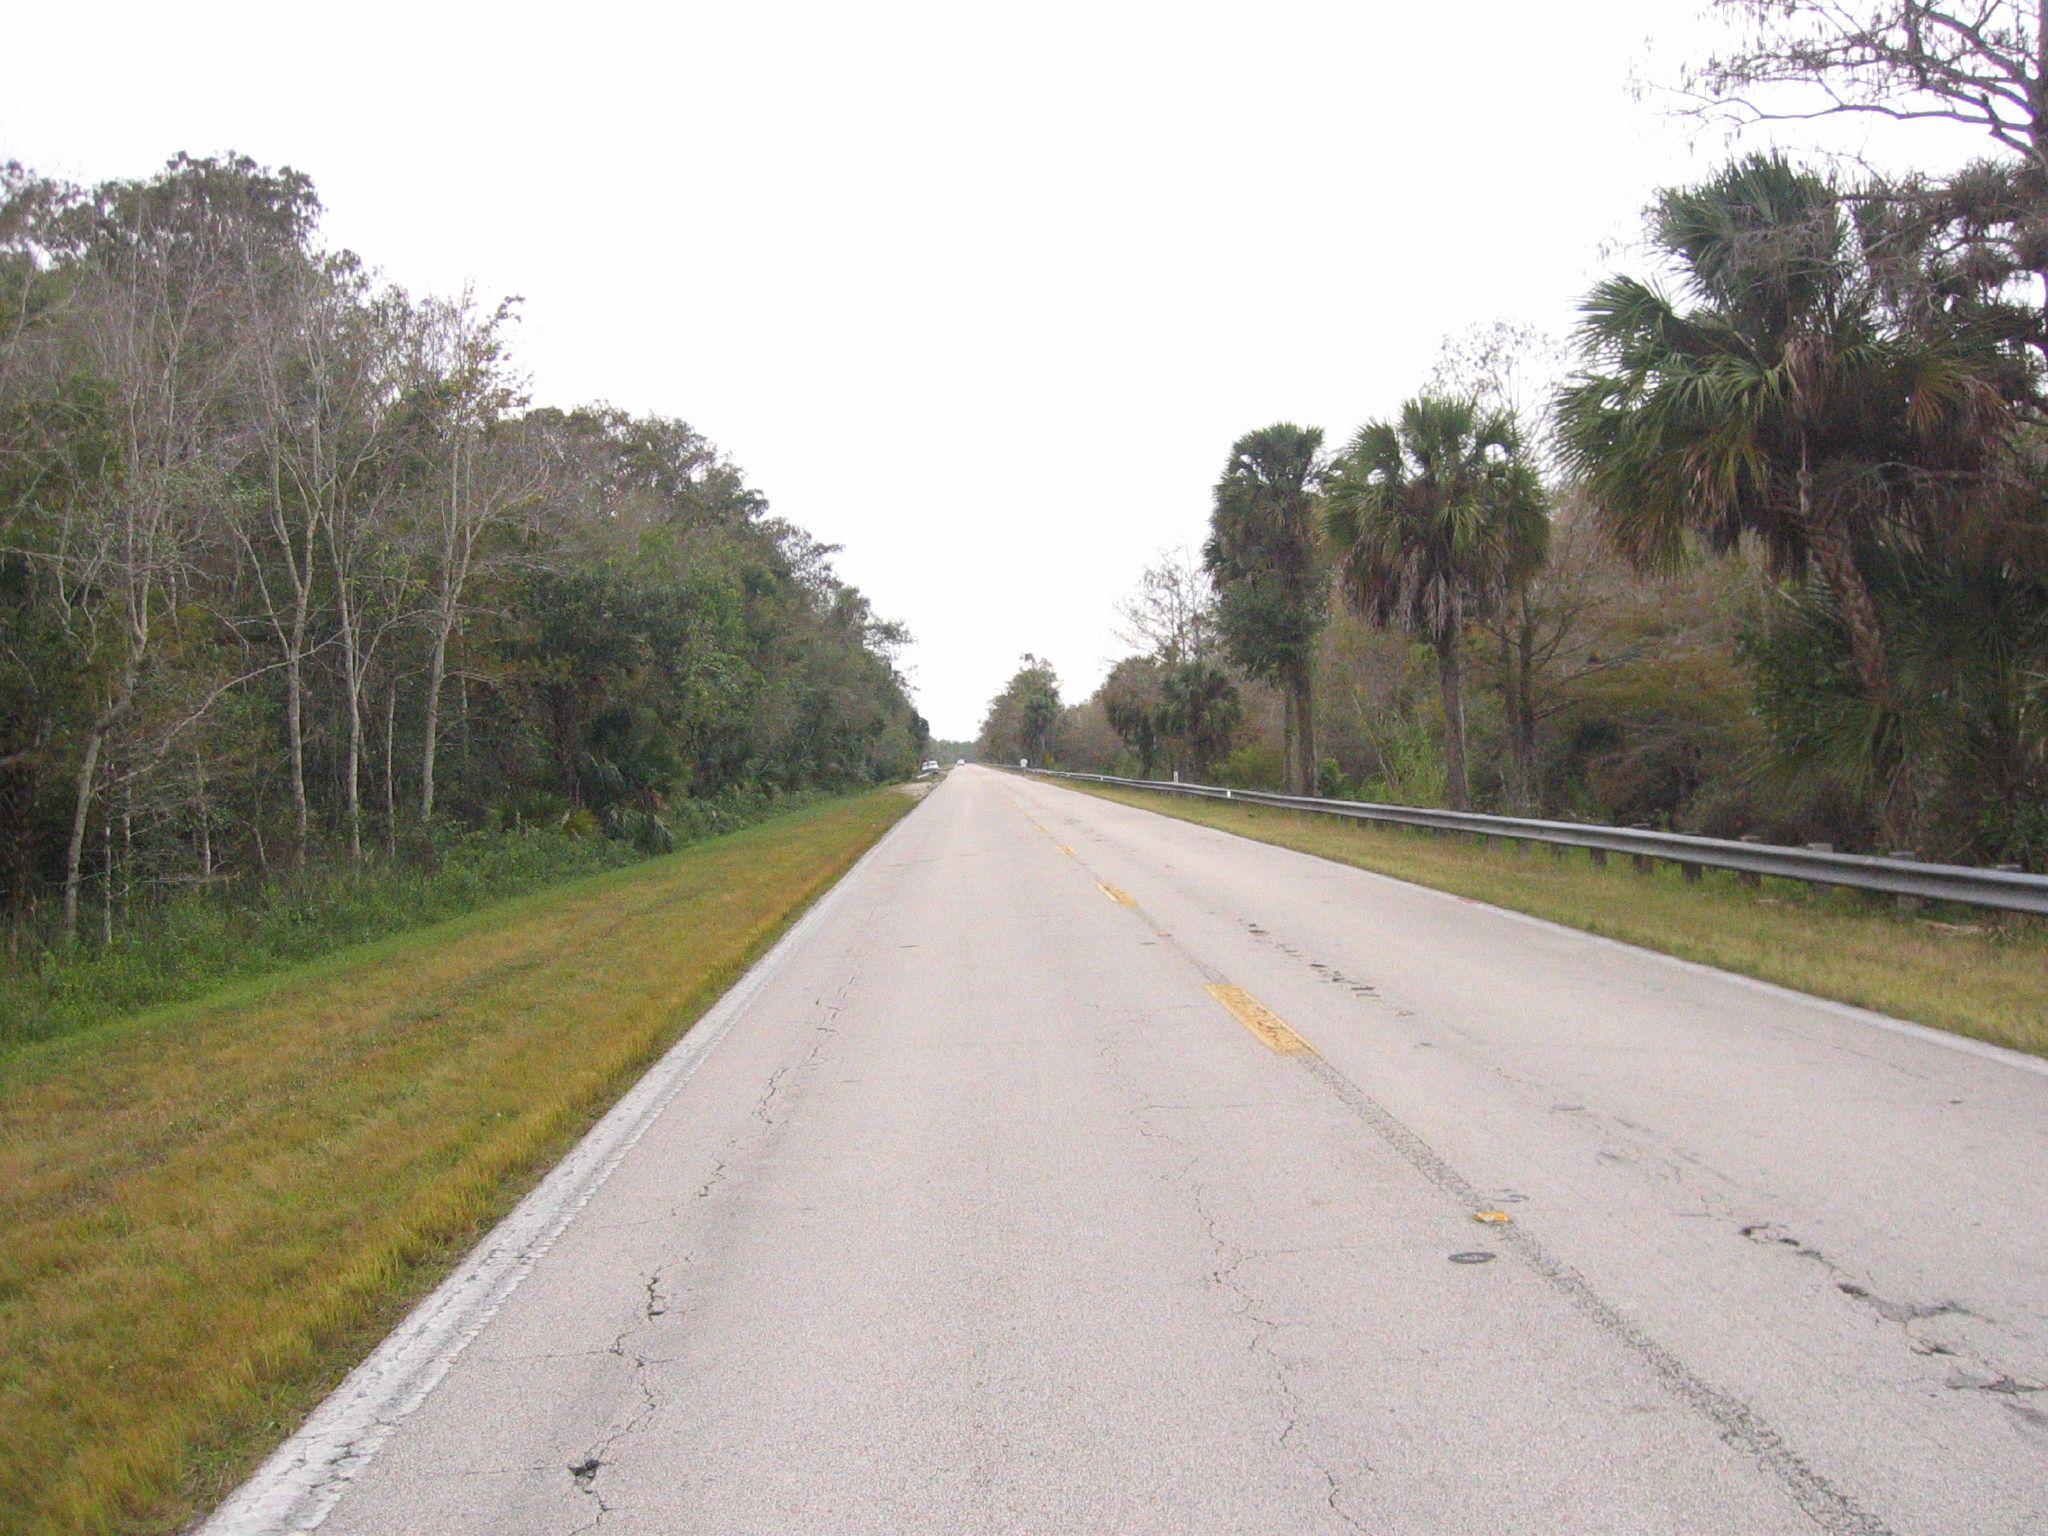 the deserted road is paved with trees and grass